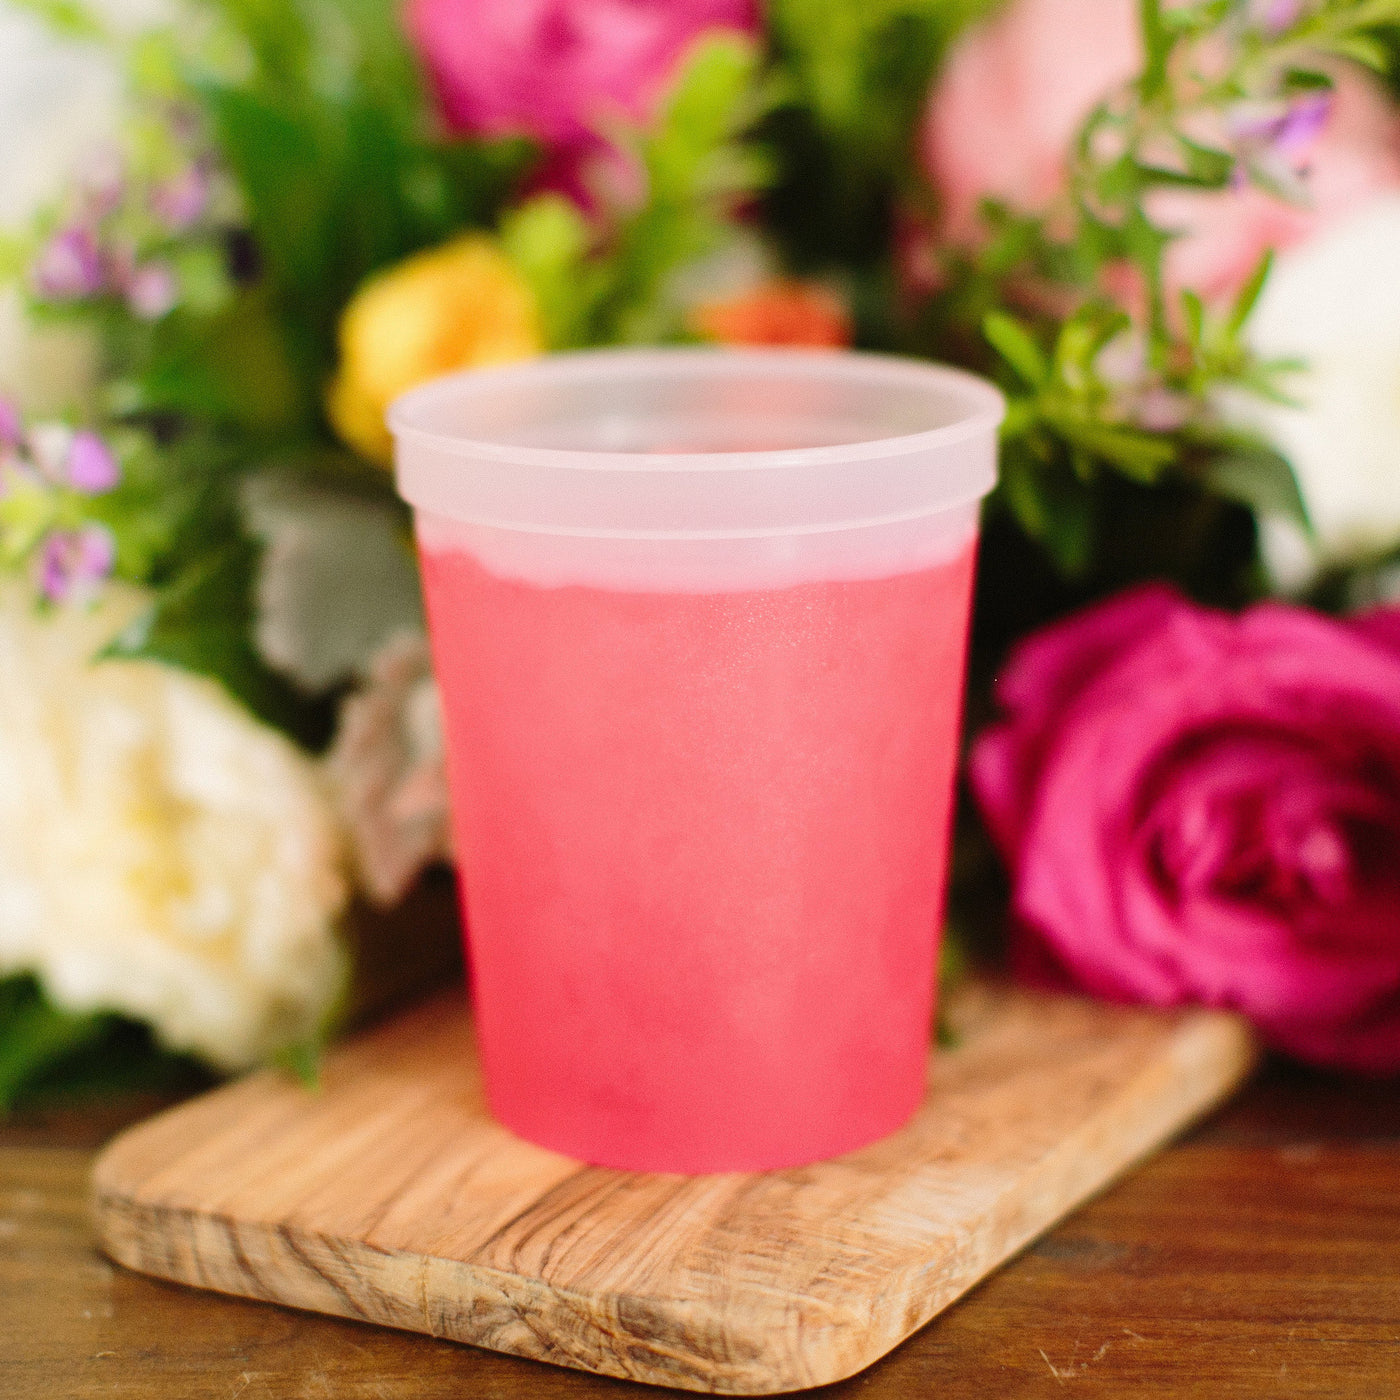 Fiesta Like There's No Manana | Floral-Theme Mood Cup #1825